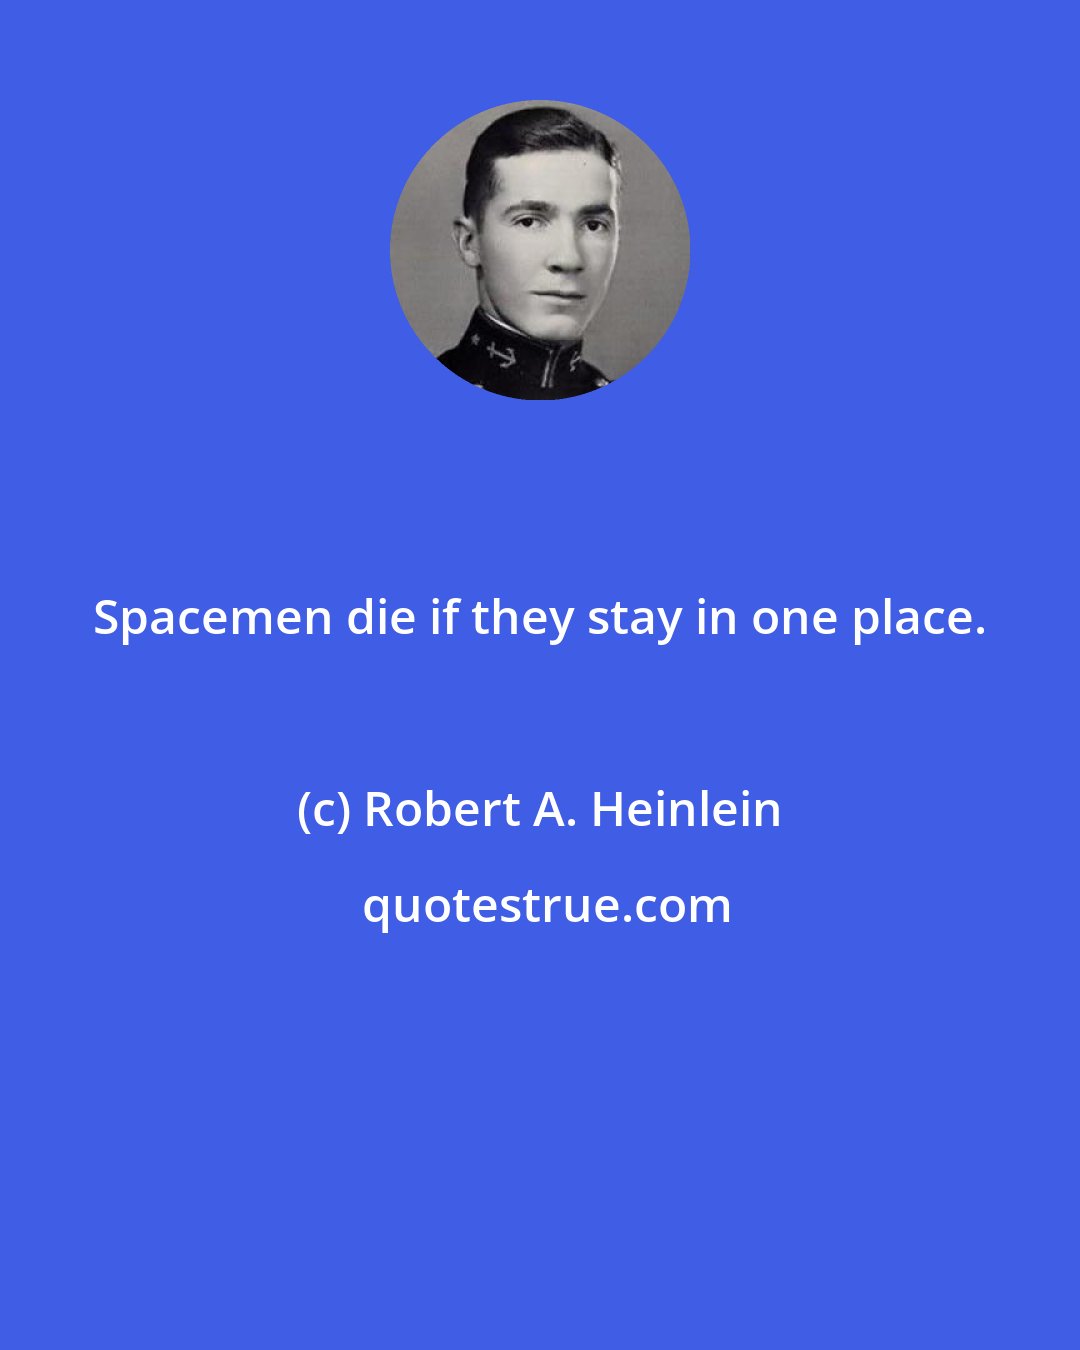 Robert A. Heinlein: Spacemen die if they stay in one place.